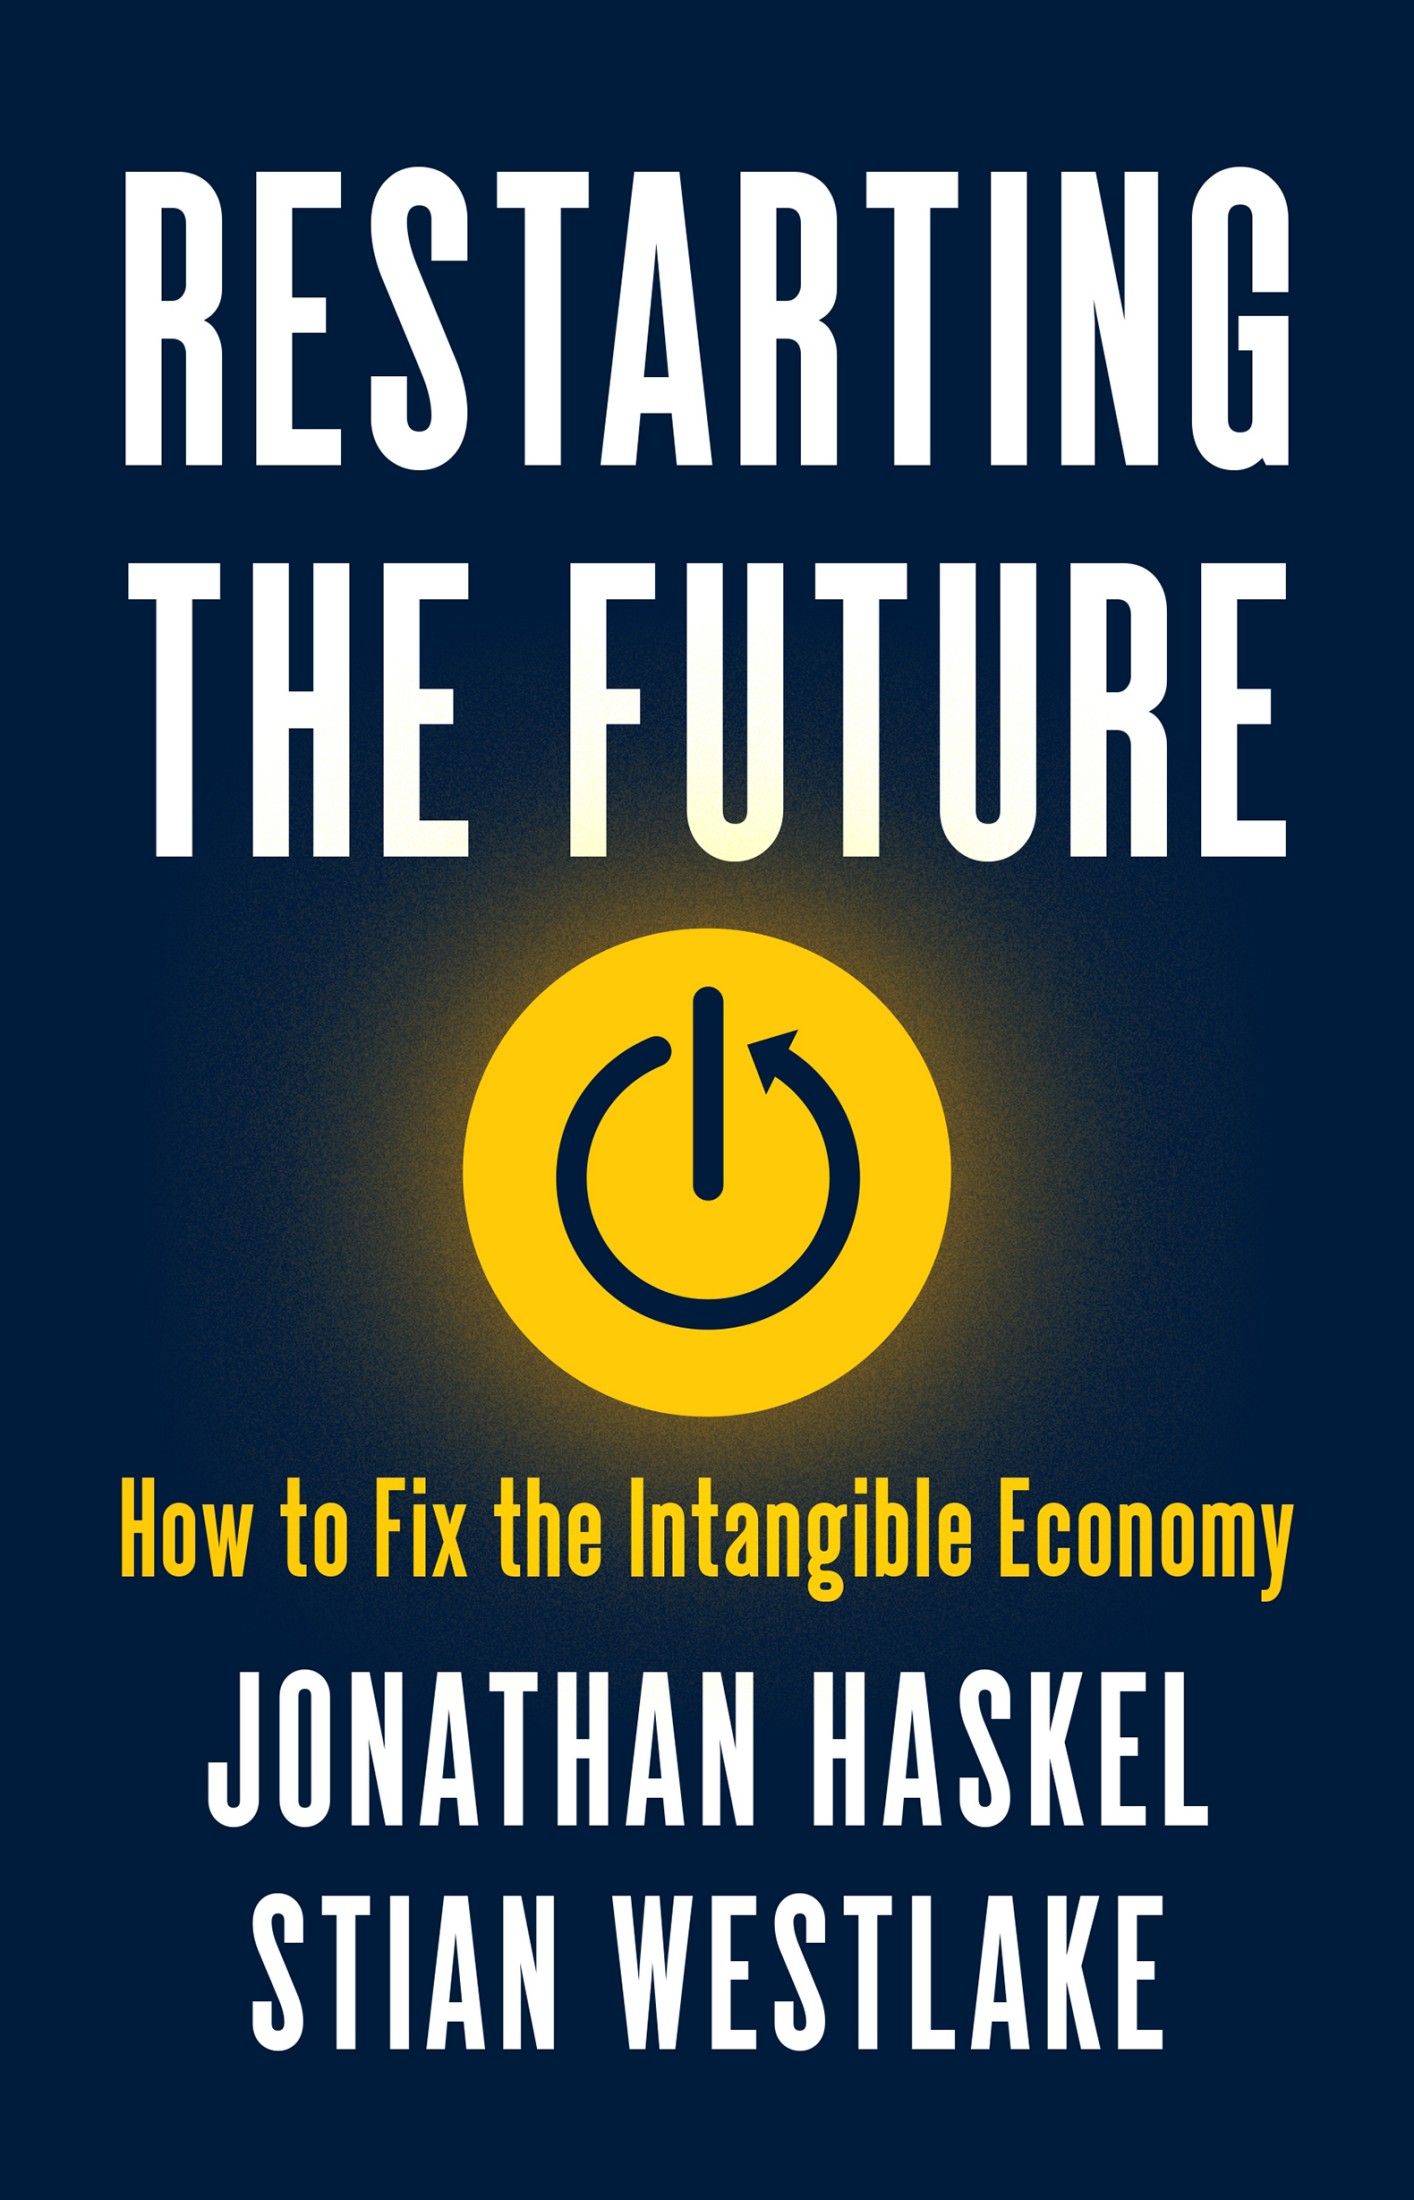 Restarting the Future - How to Fix the Intangible Economy